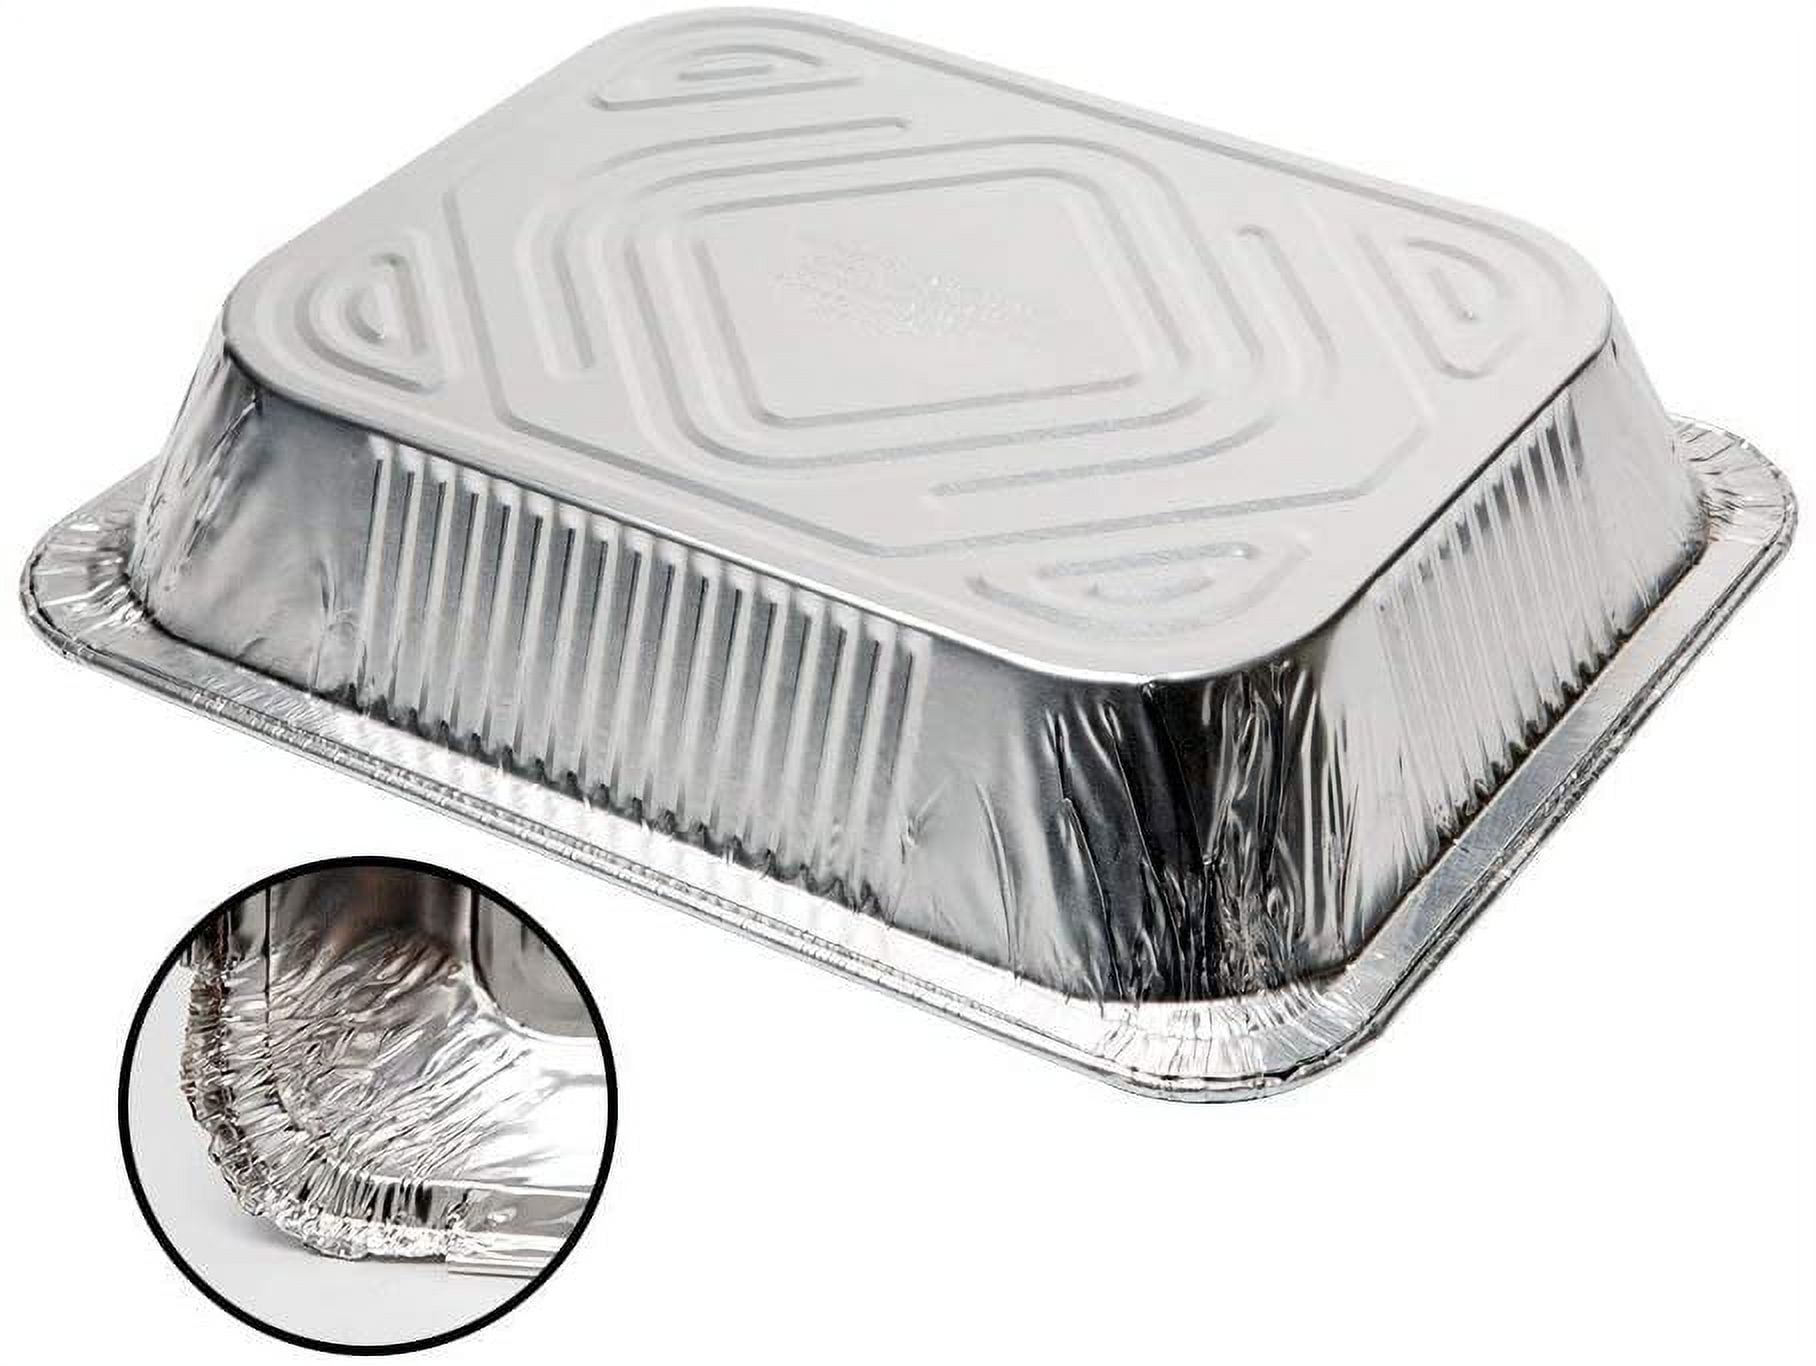 Jetfoil Aluminum Foil Steam Table Pans With Lids | Perfect for Catering,  Party Supplies & Suitable for Broiling, Baking, Cakes and Pies - 9 x 13  Half